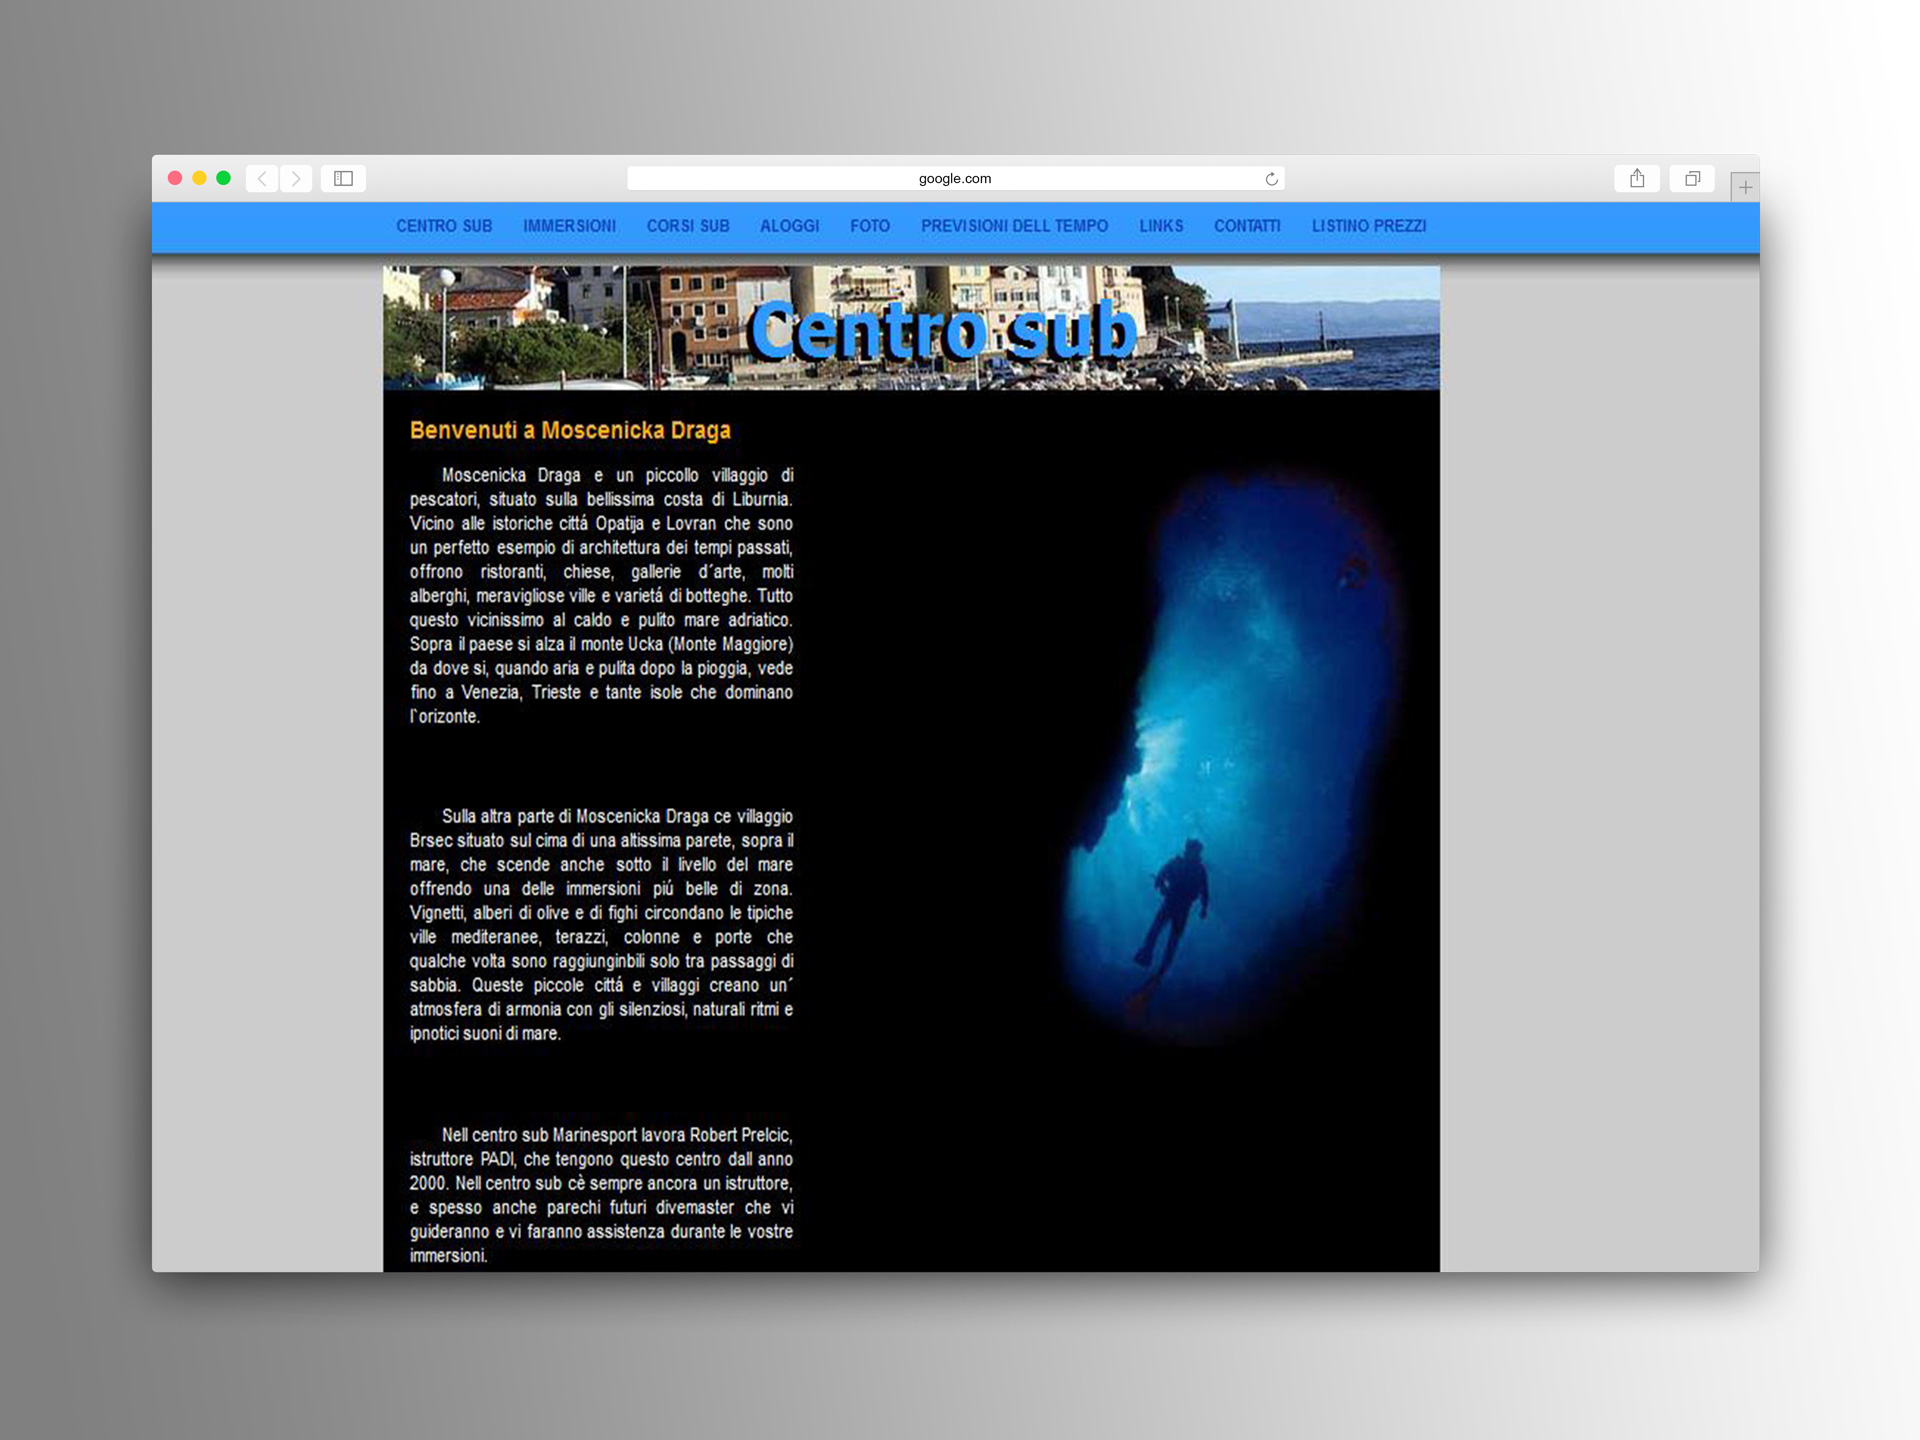 The original italian version of the Marine Sport dive center Home page